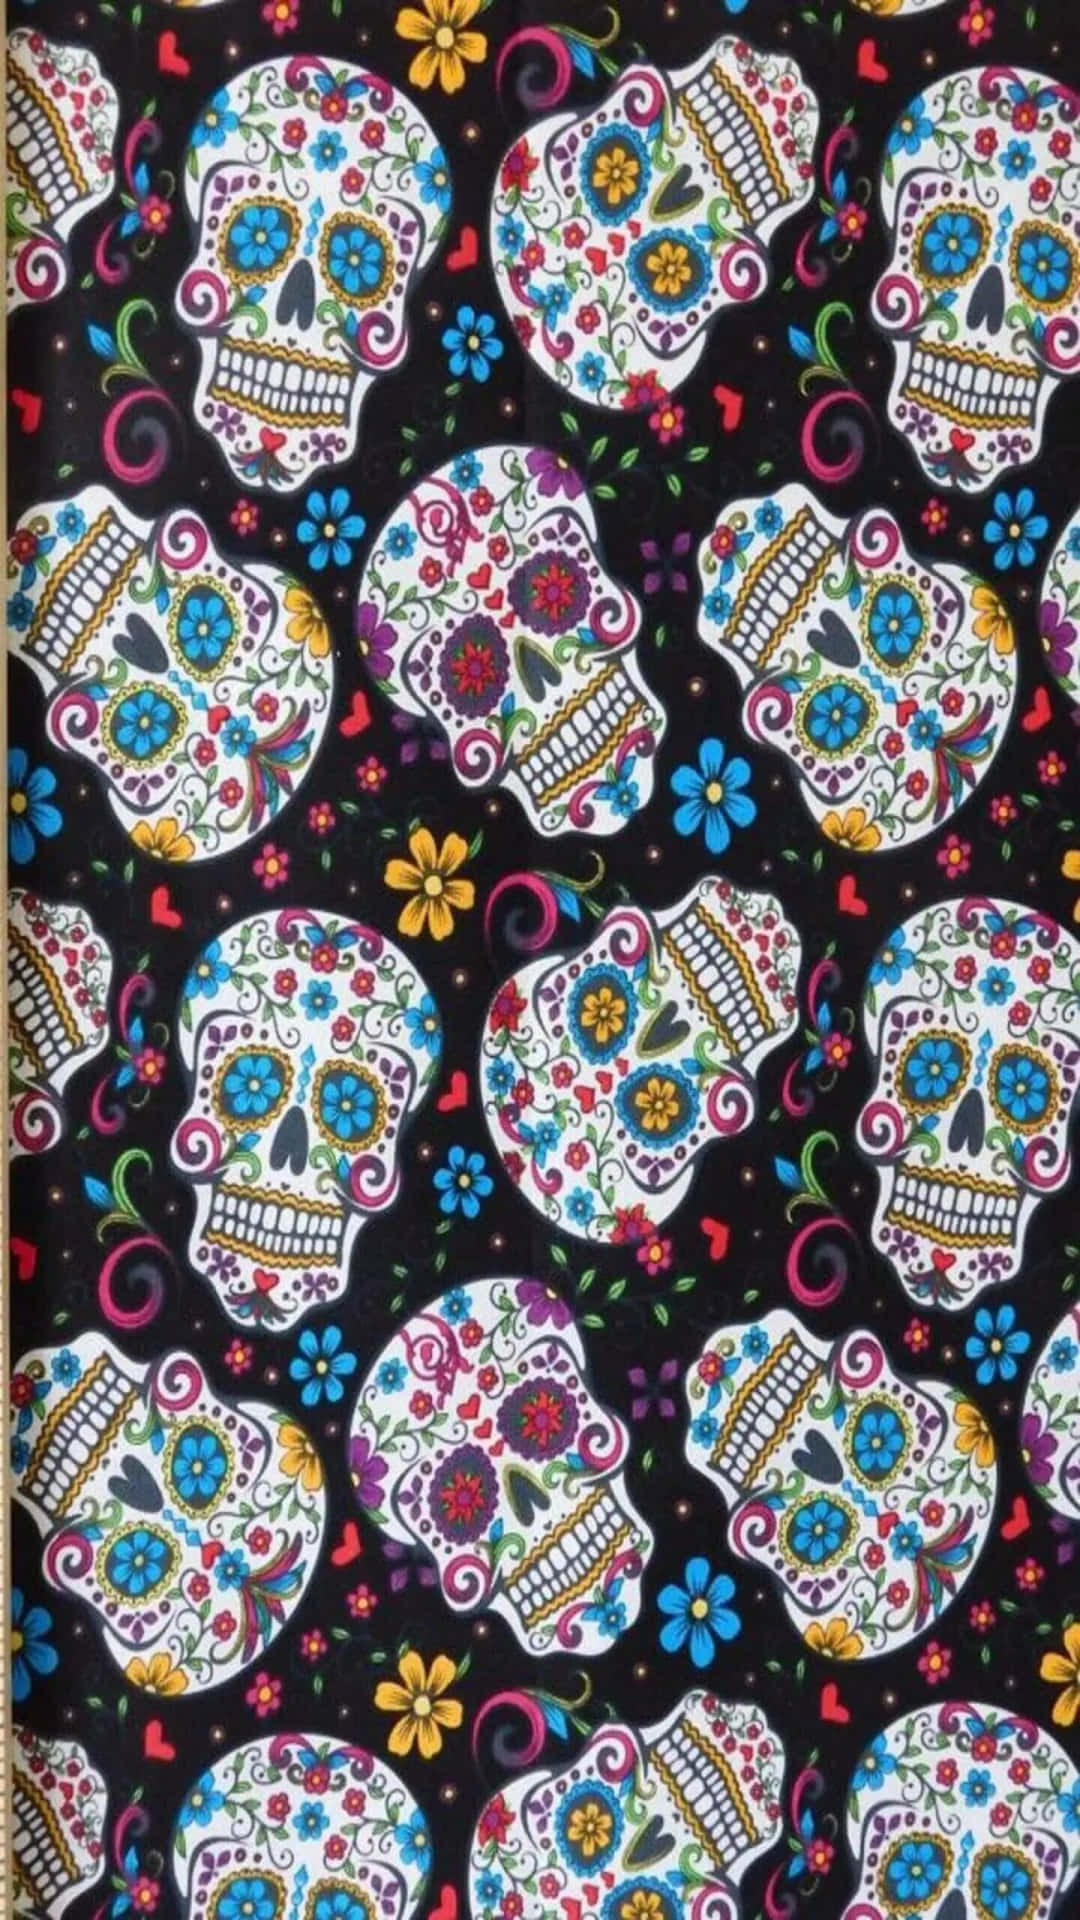 Get the coolest phone case ever with this stunning Sugar Skull design. Wallpaper